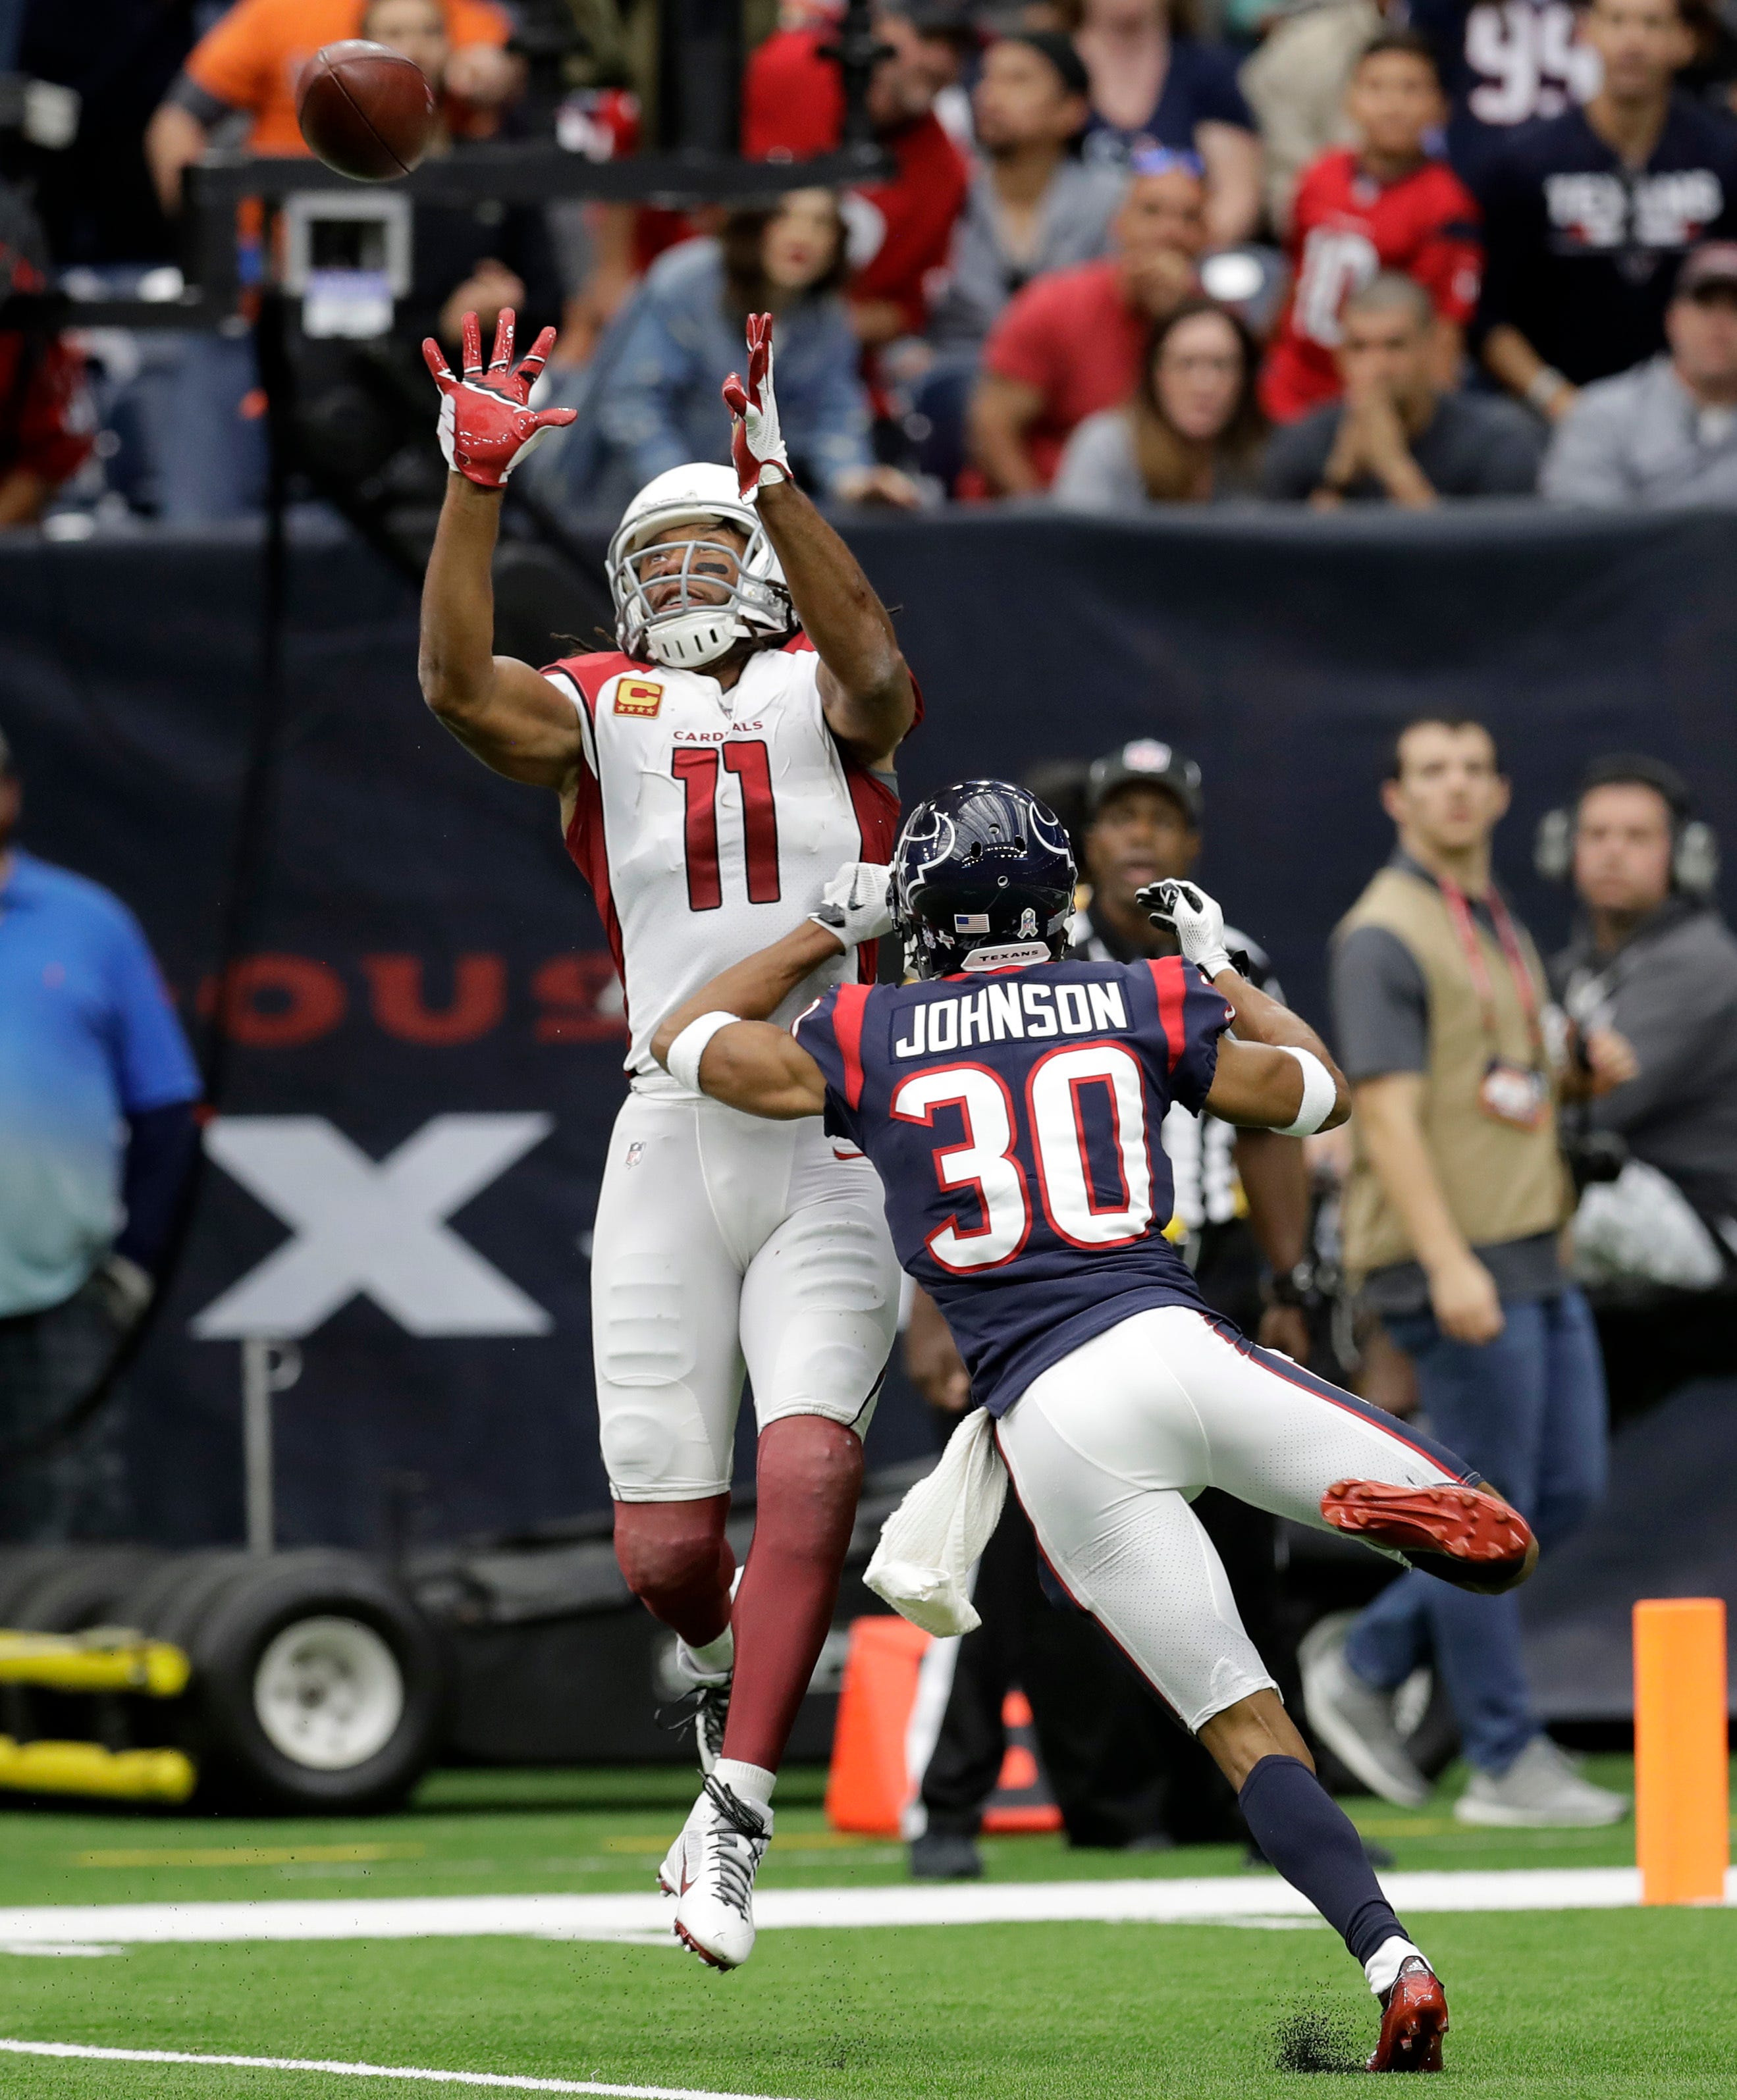 Foreman has 2 TDs to help Texans to 31-21 win over Cardinals